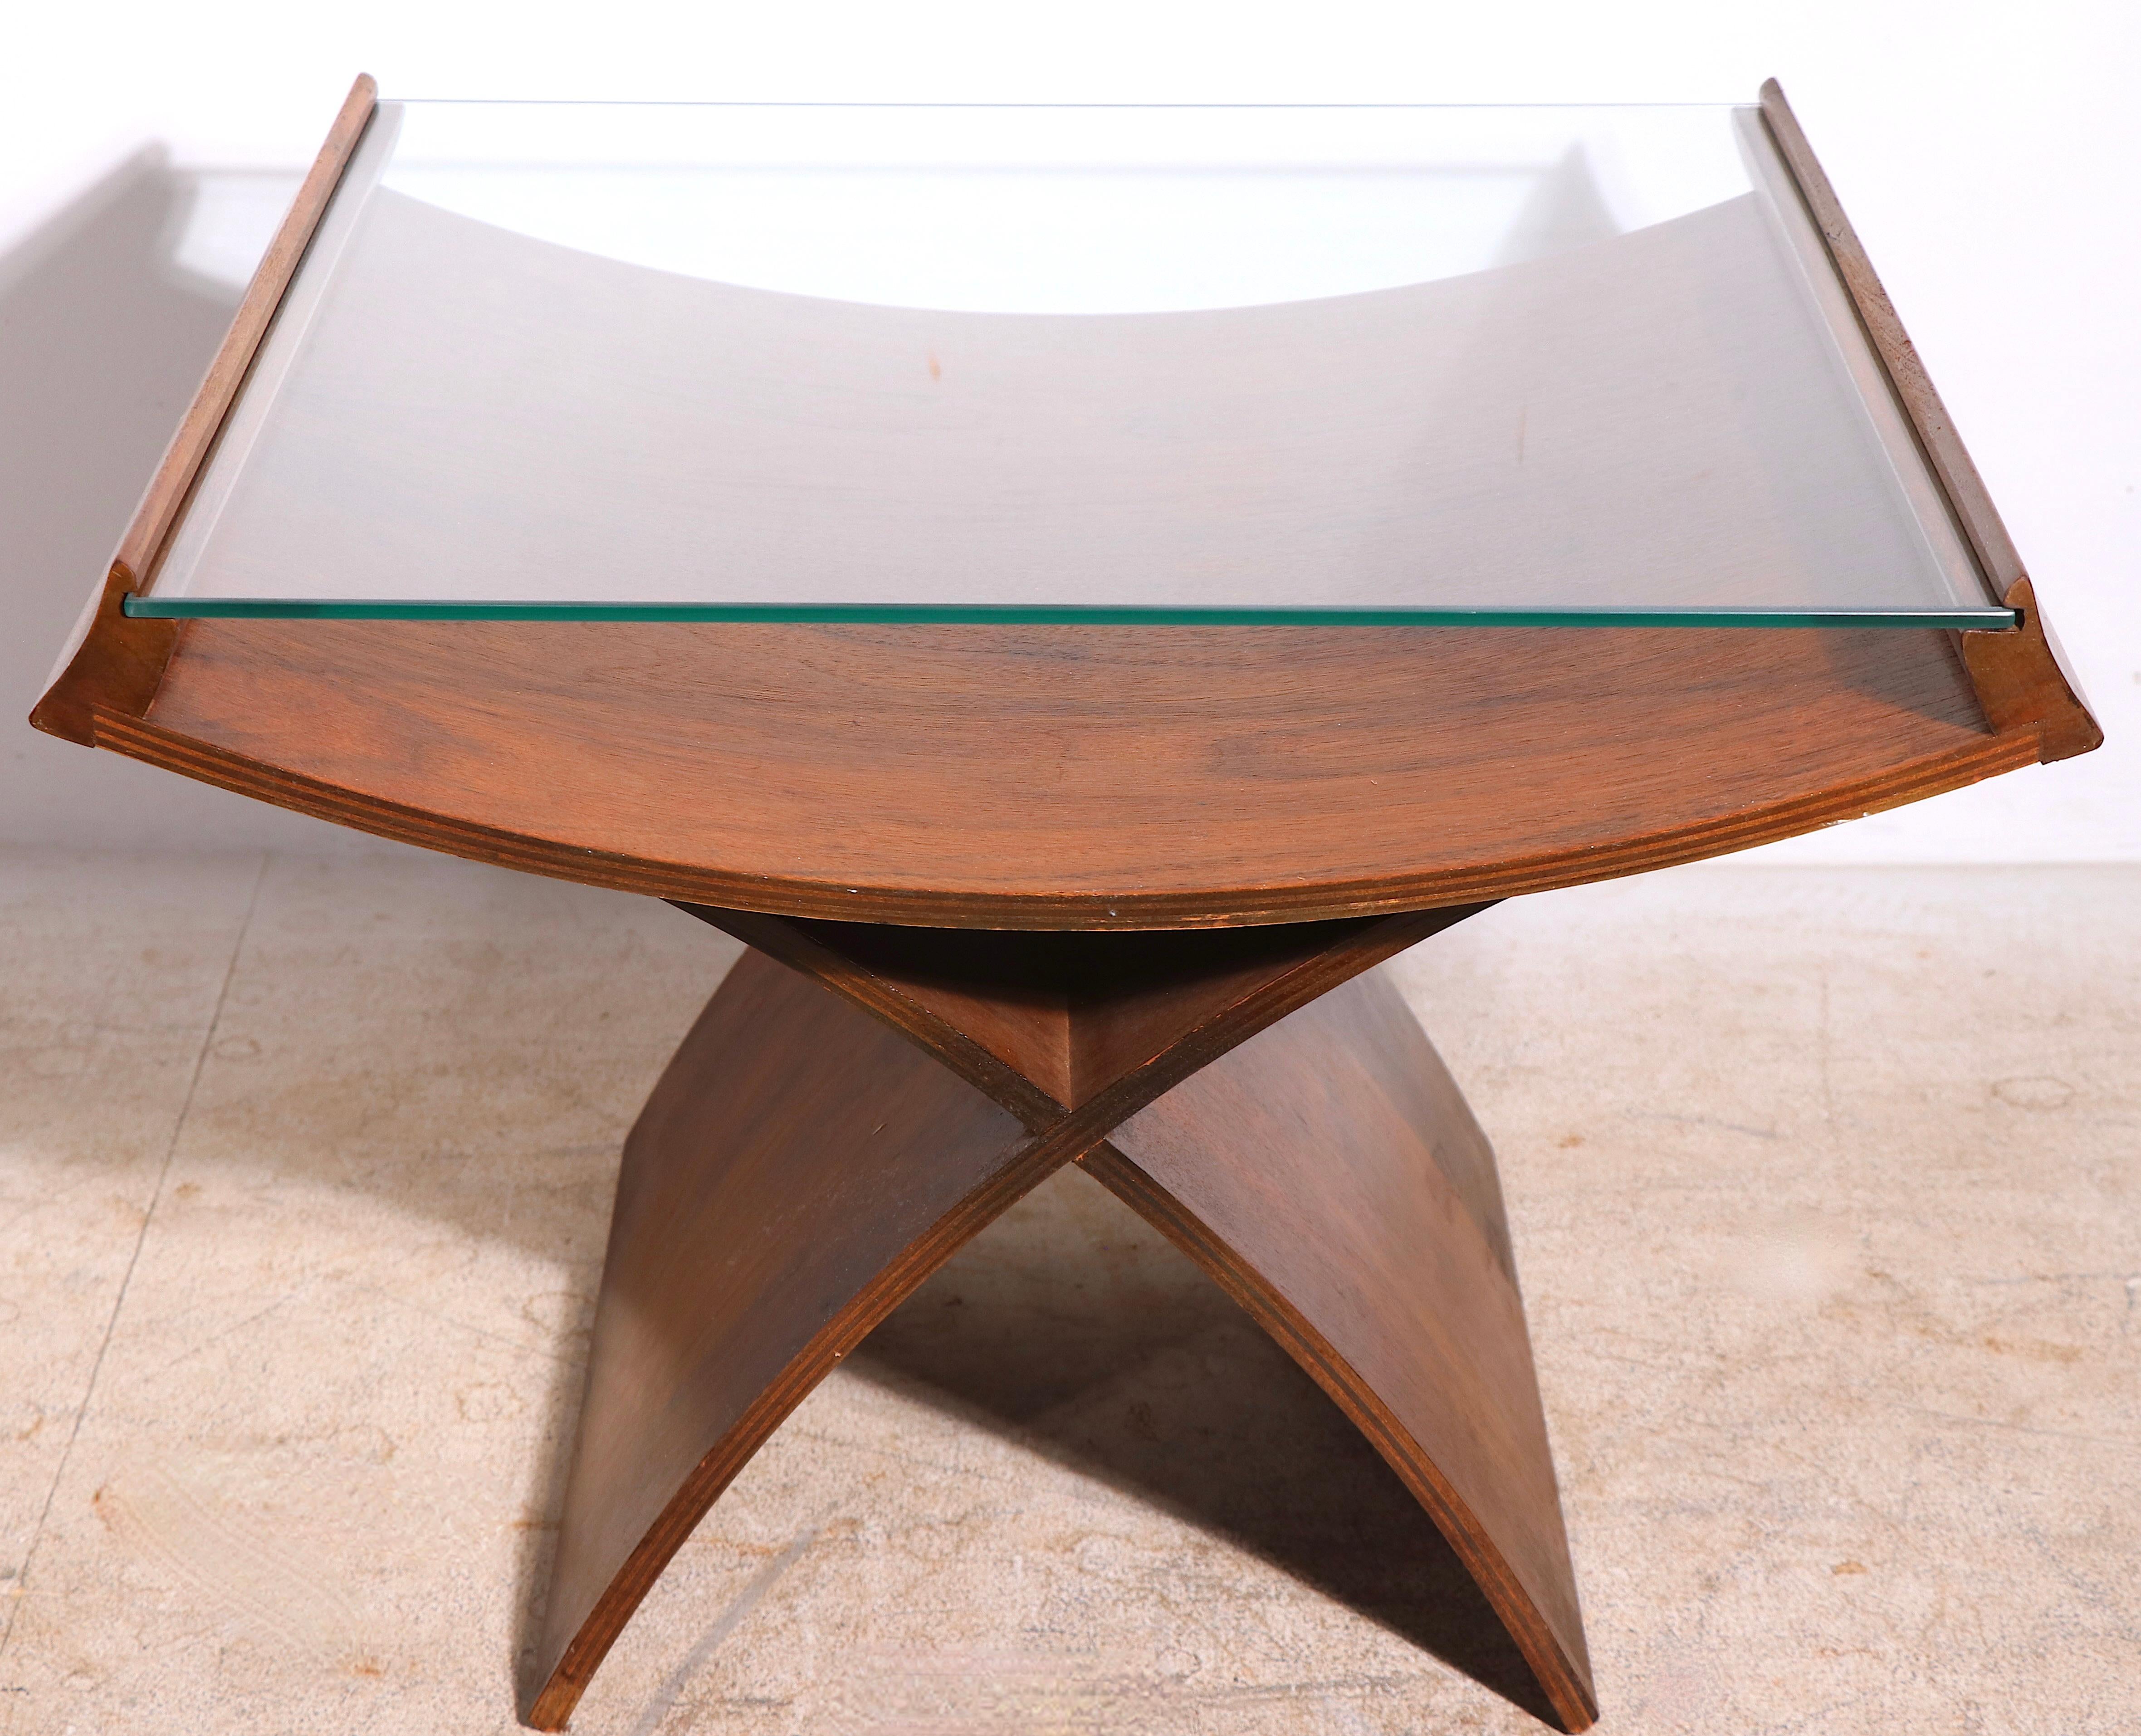 Chic mid-century side, or end, table having an arched bent wood base and center with slide in plate glass top. Sophisticated architectural Japanese influenced design, probably American made, unsigned. 
The table is in very good original condition